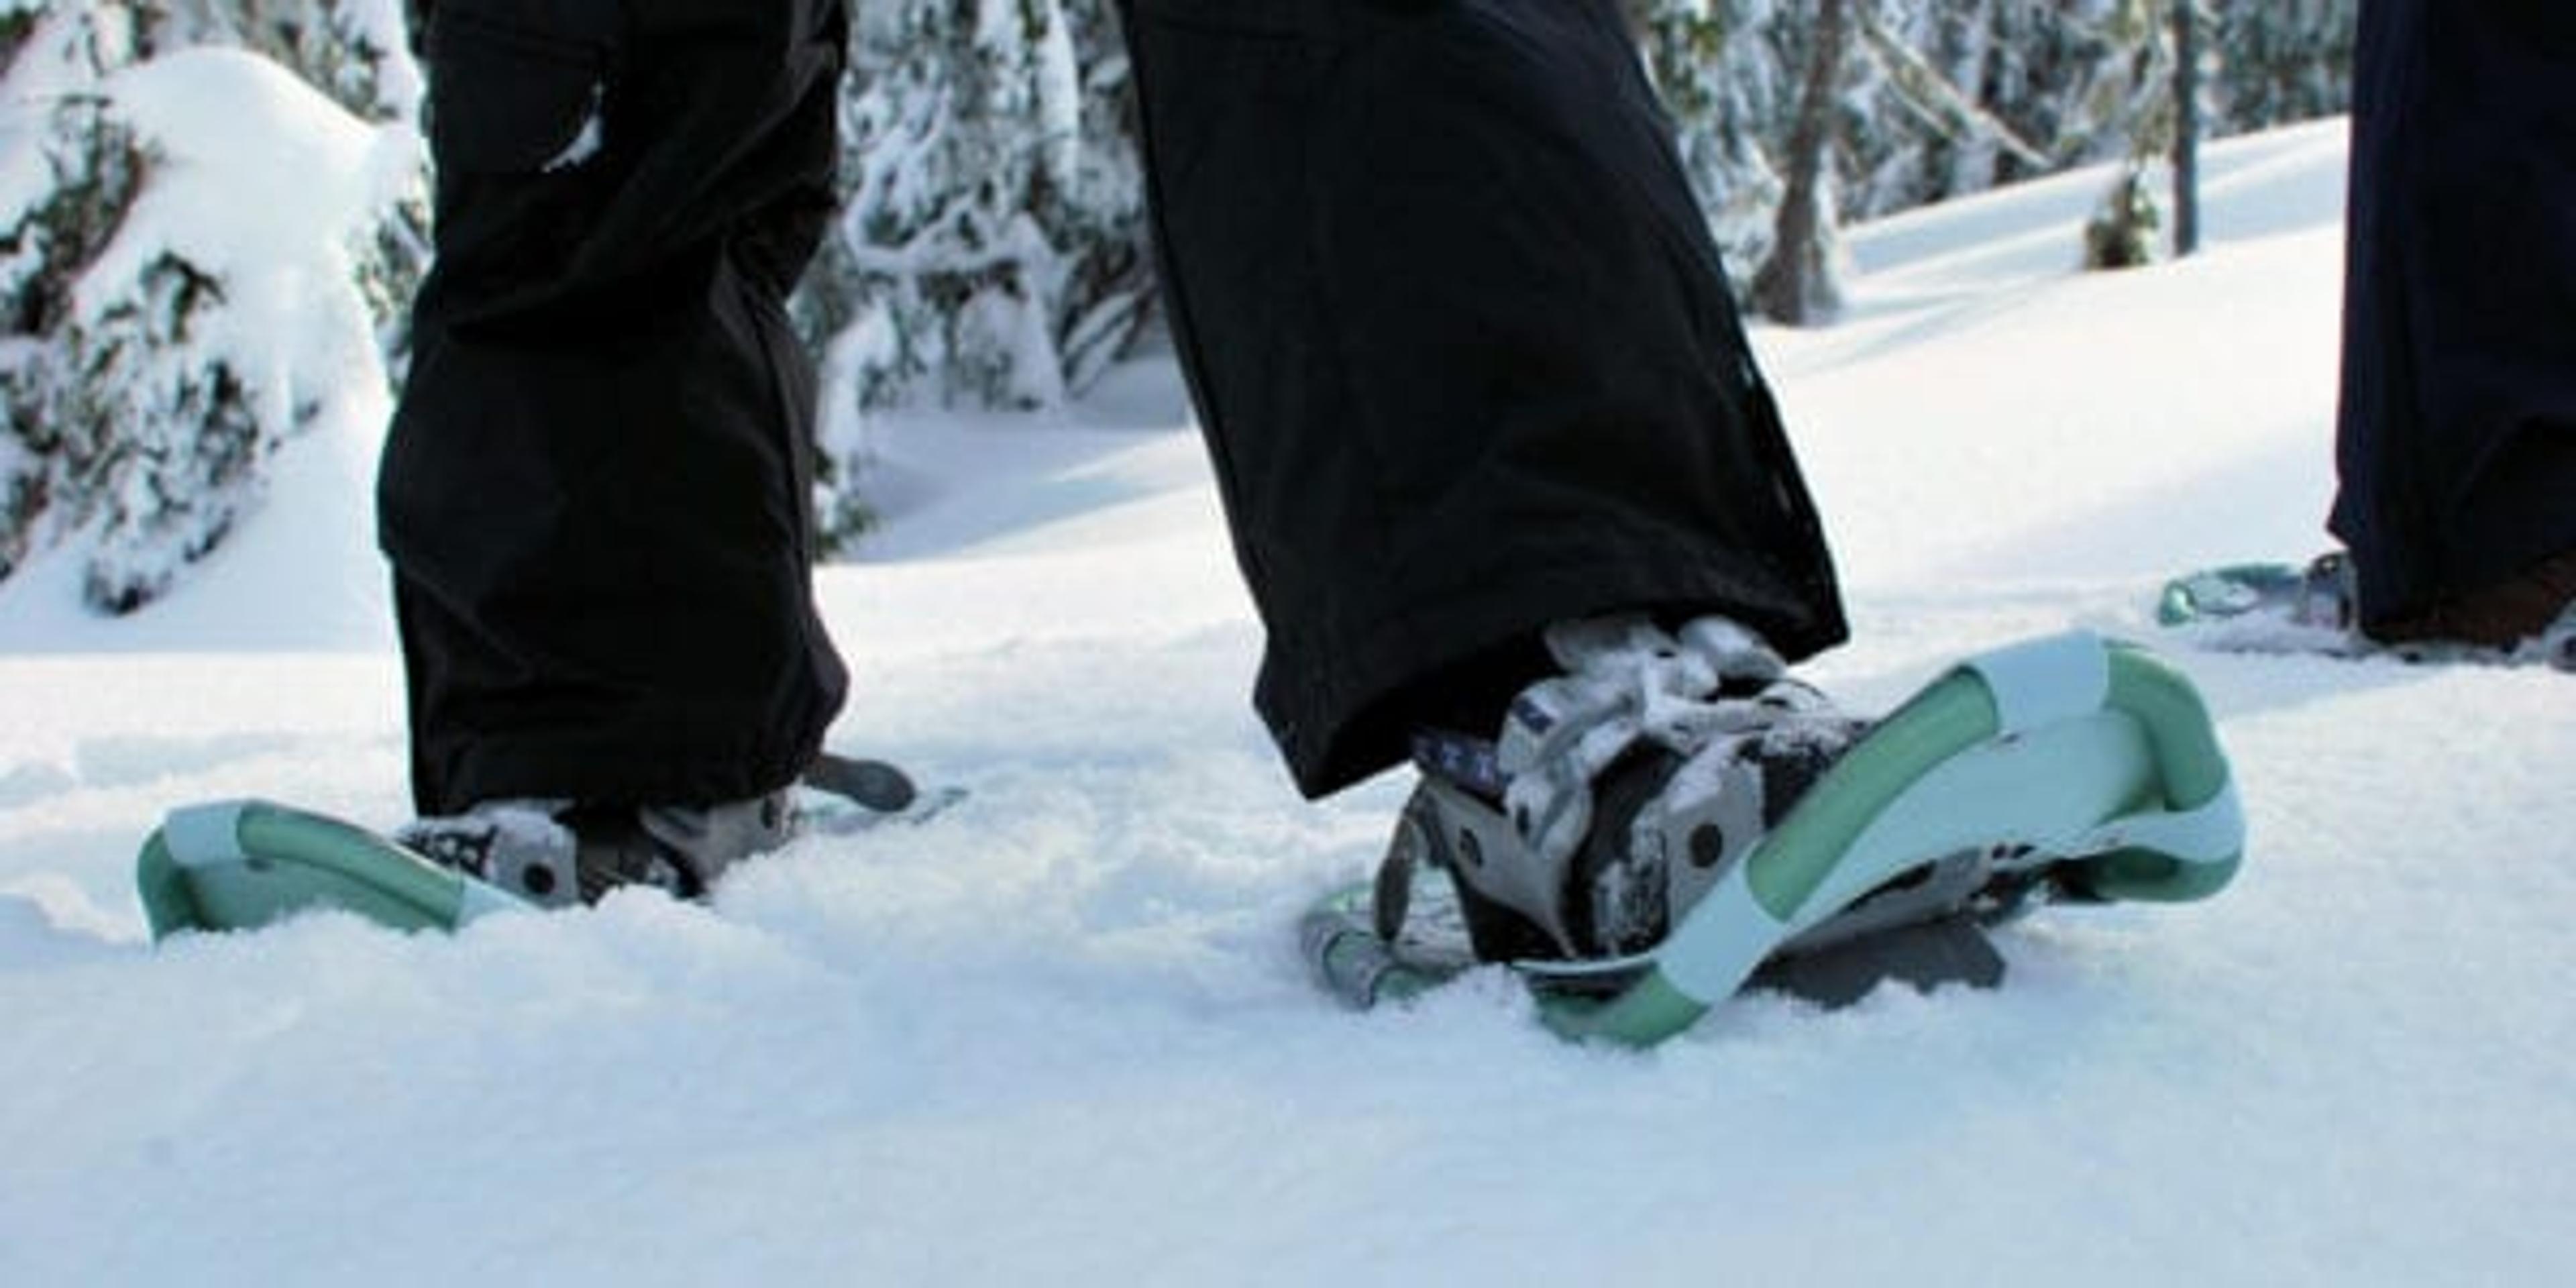 winter in snowshoes